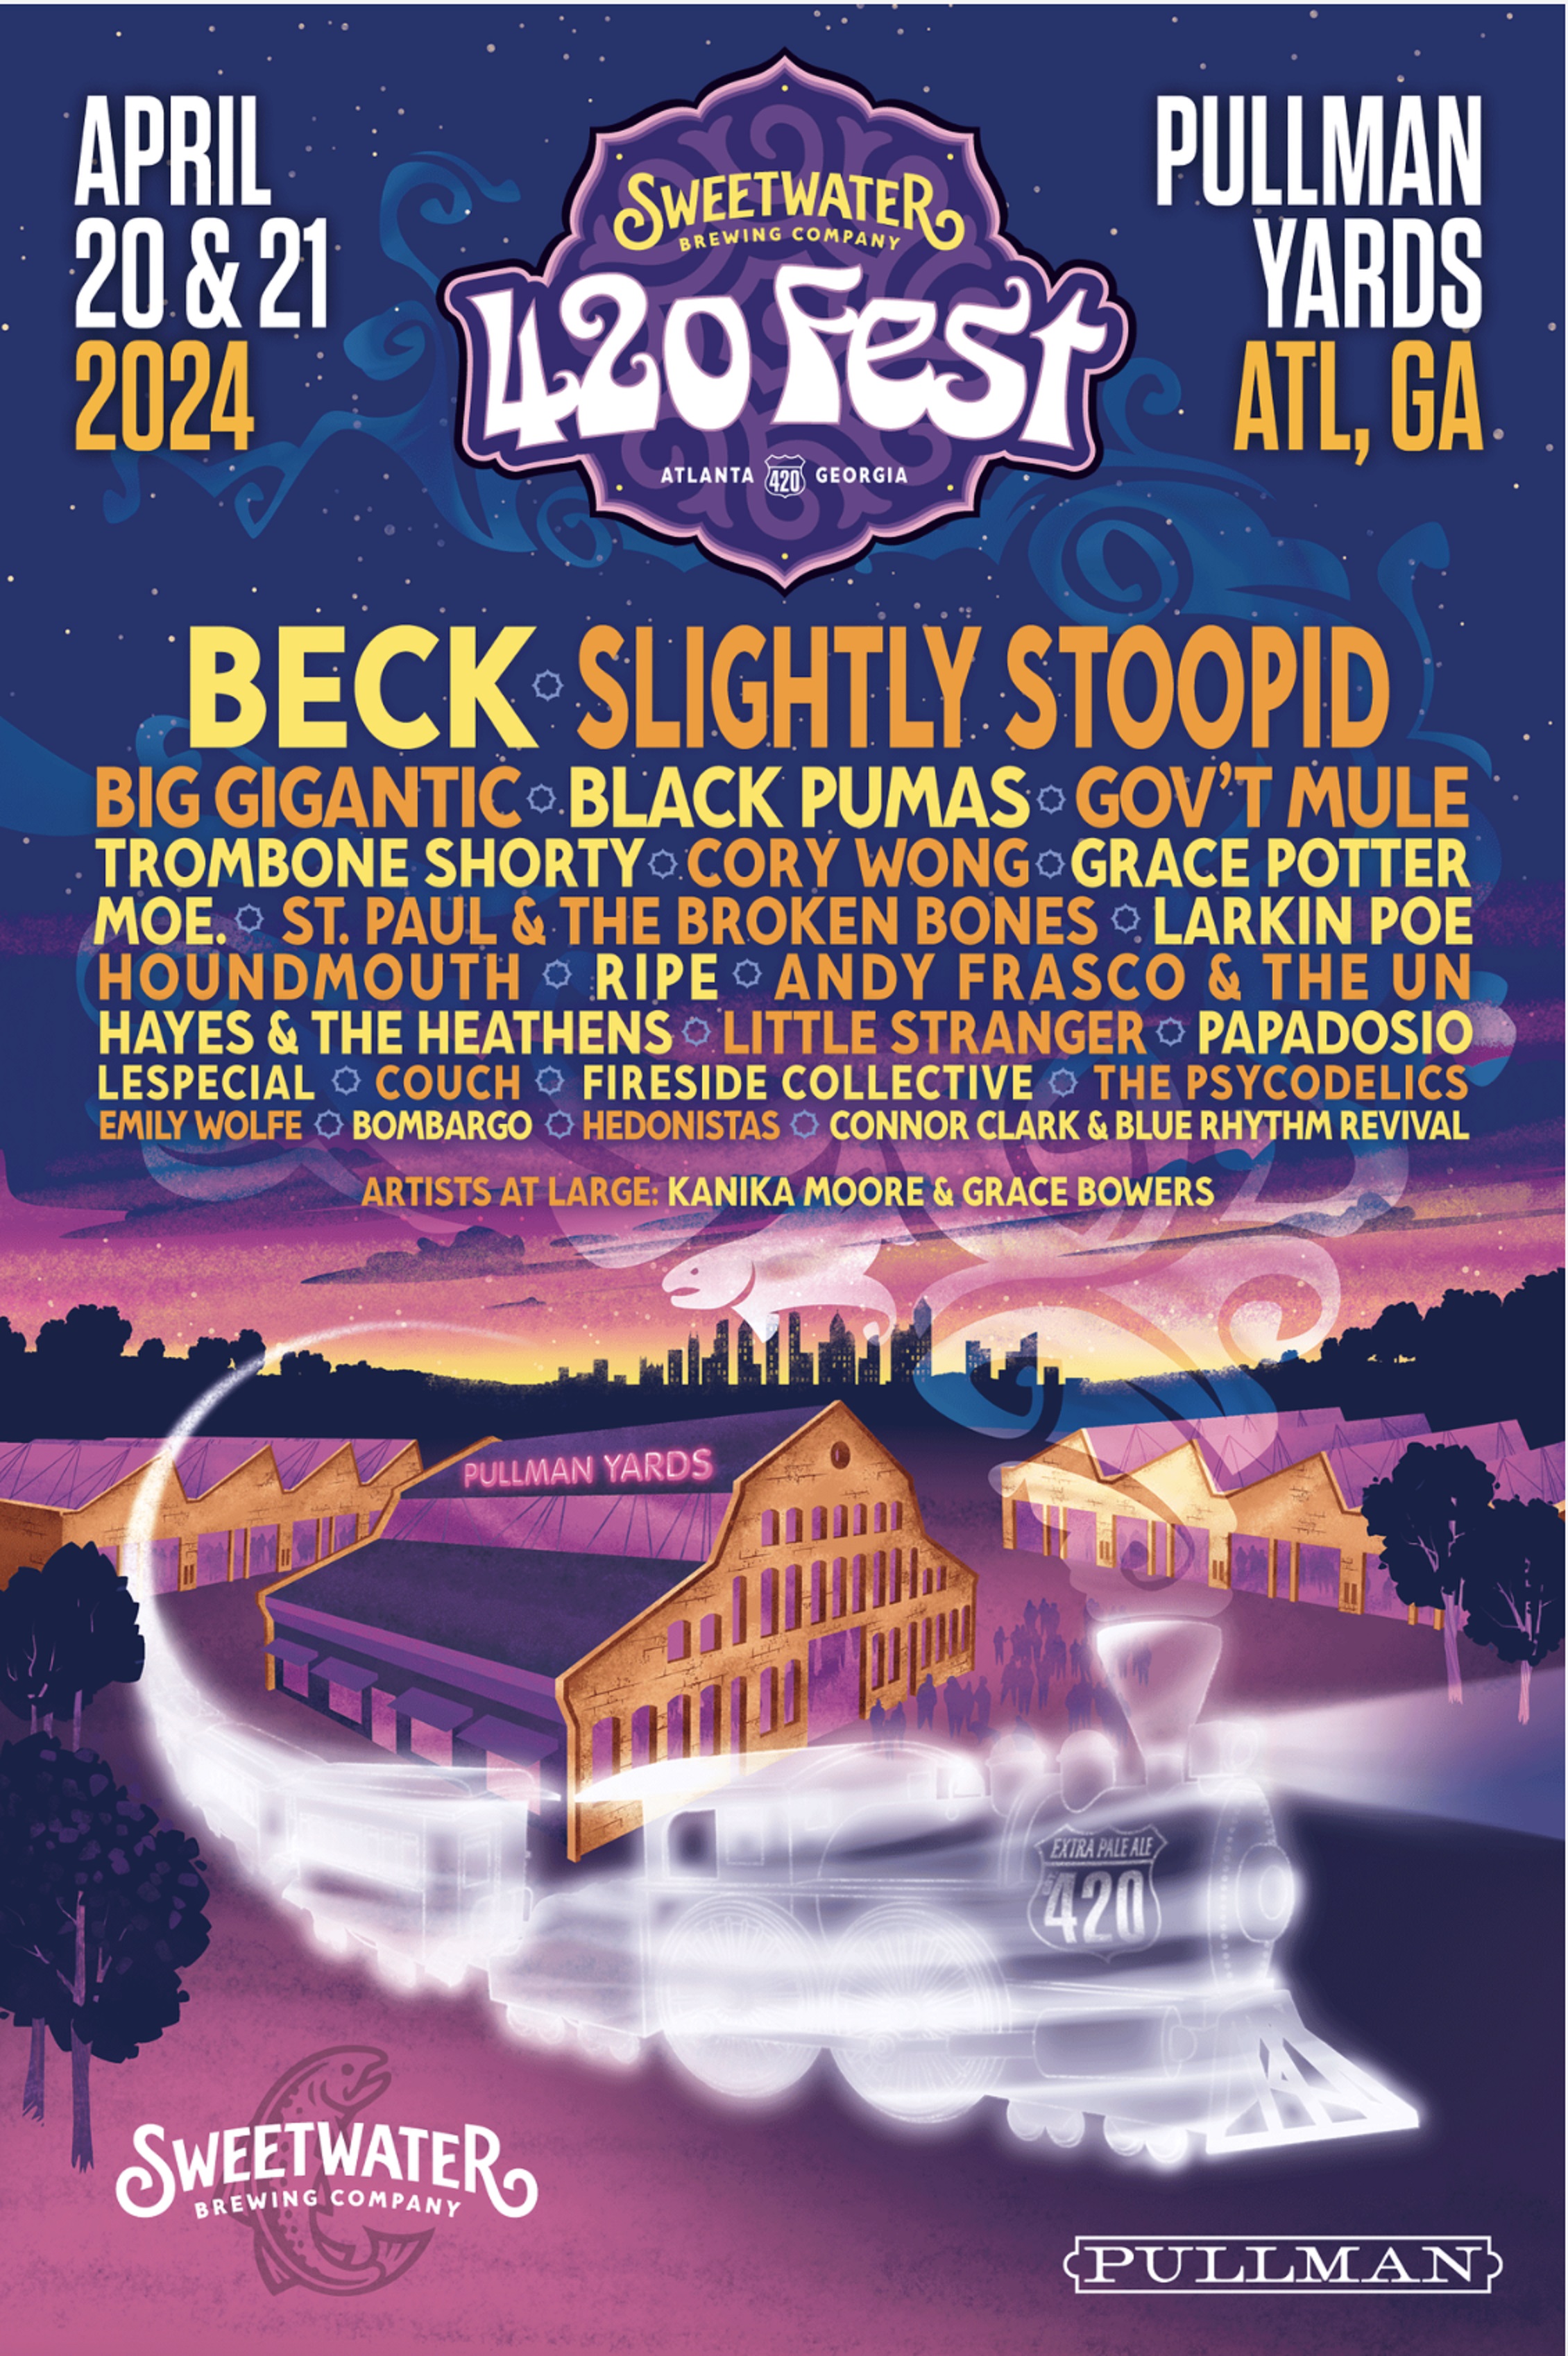 SWEETWATER 420 FEST ANNOUNCES LINEUP FEATURING 25+ ARTISTS, APRIL 20 & 21, 2024